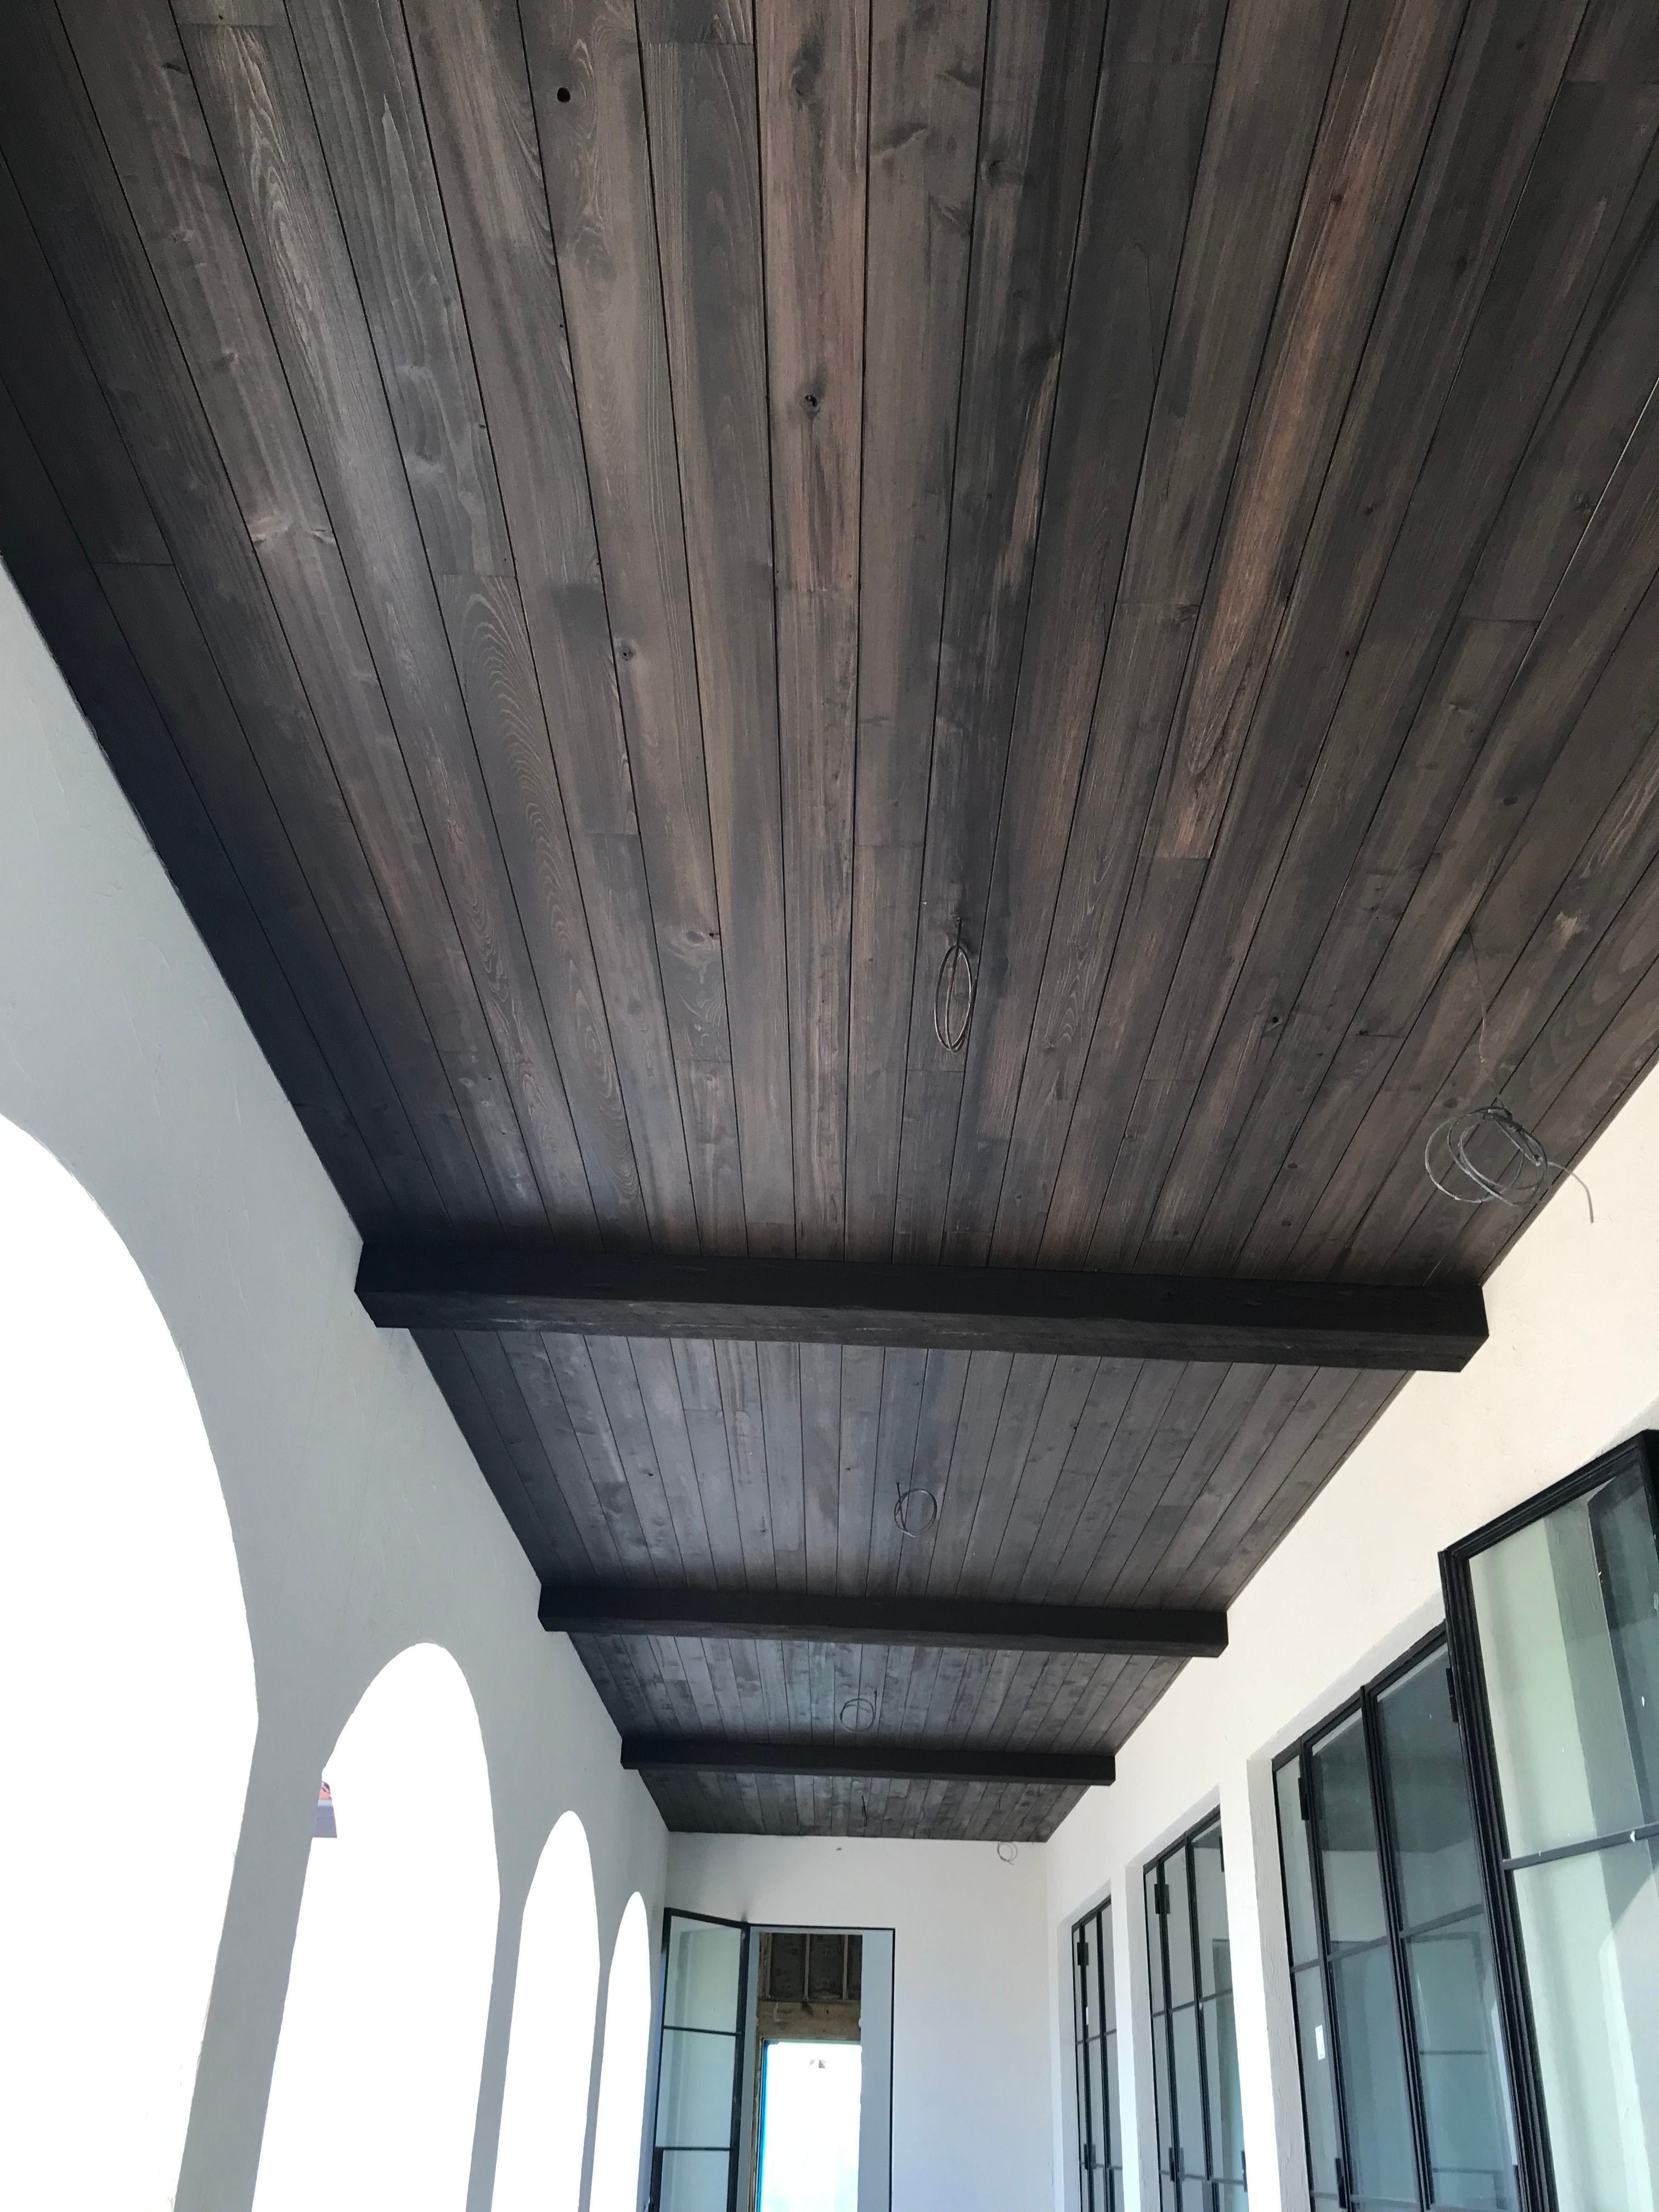 Stained Wooden Ceiling